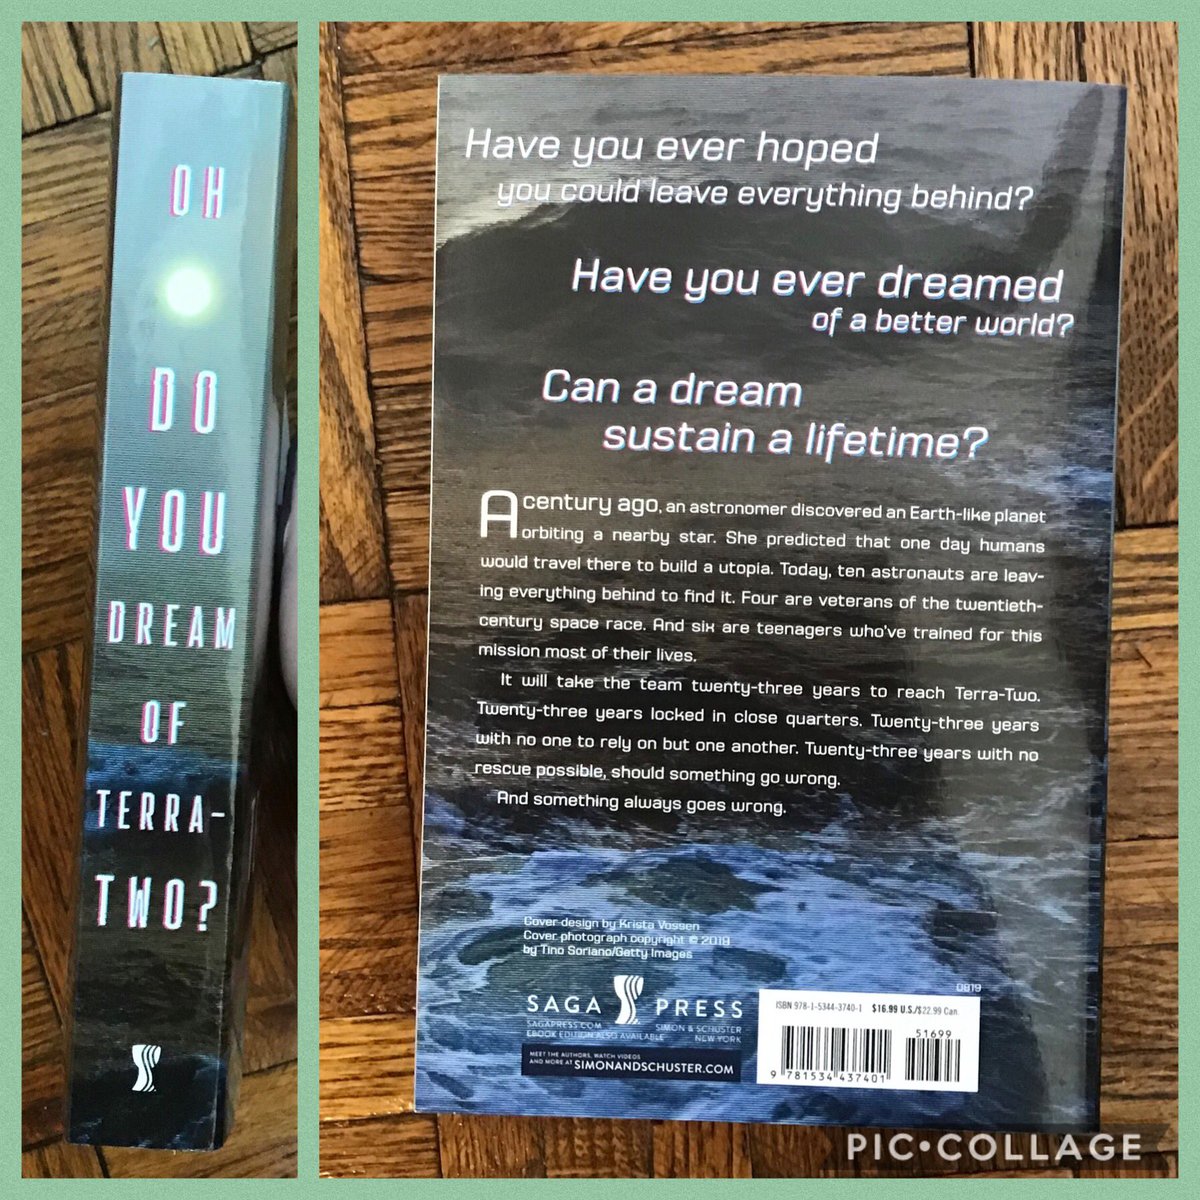 7) Do You Dream of Terra-Two?, Temi Oh. Simon&Schuster. Jacket photo by Tino Soriano, design by Krista Vossen. ISBN 978-1-5344-3740-1. Scifi. This was another case of “a book I saw while I was shelving and was immediately drawn to.” The cover has a subtle CRT-like effect!